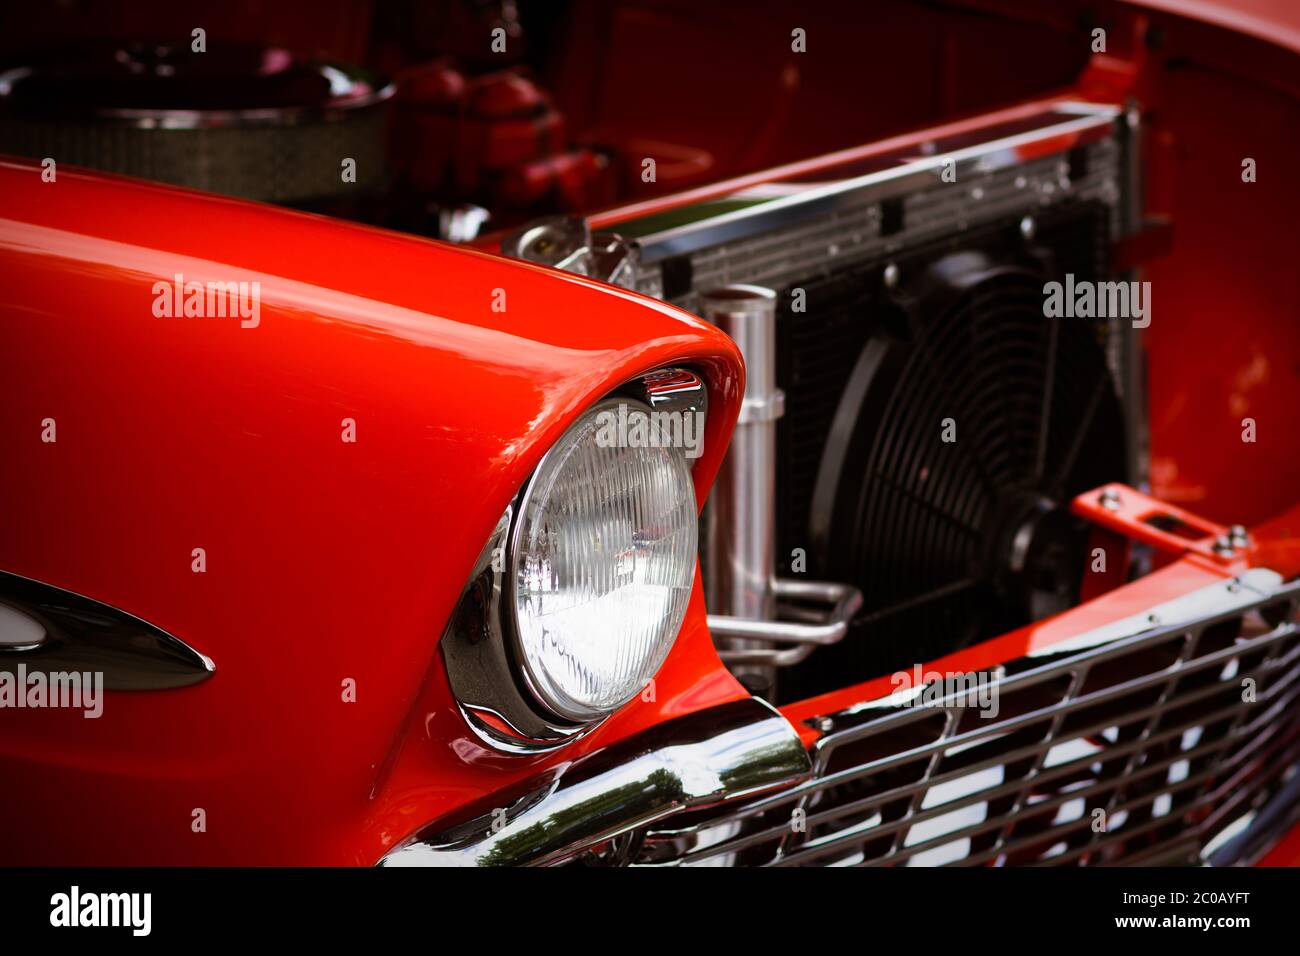 Red Automobile Hood Open With Engine Showing Stock Photo